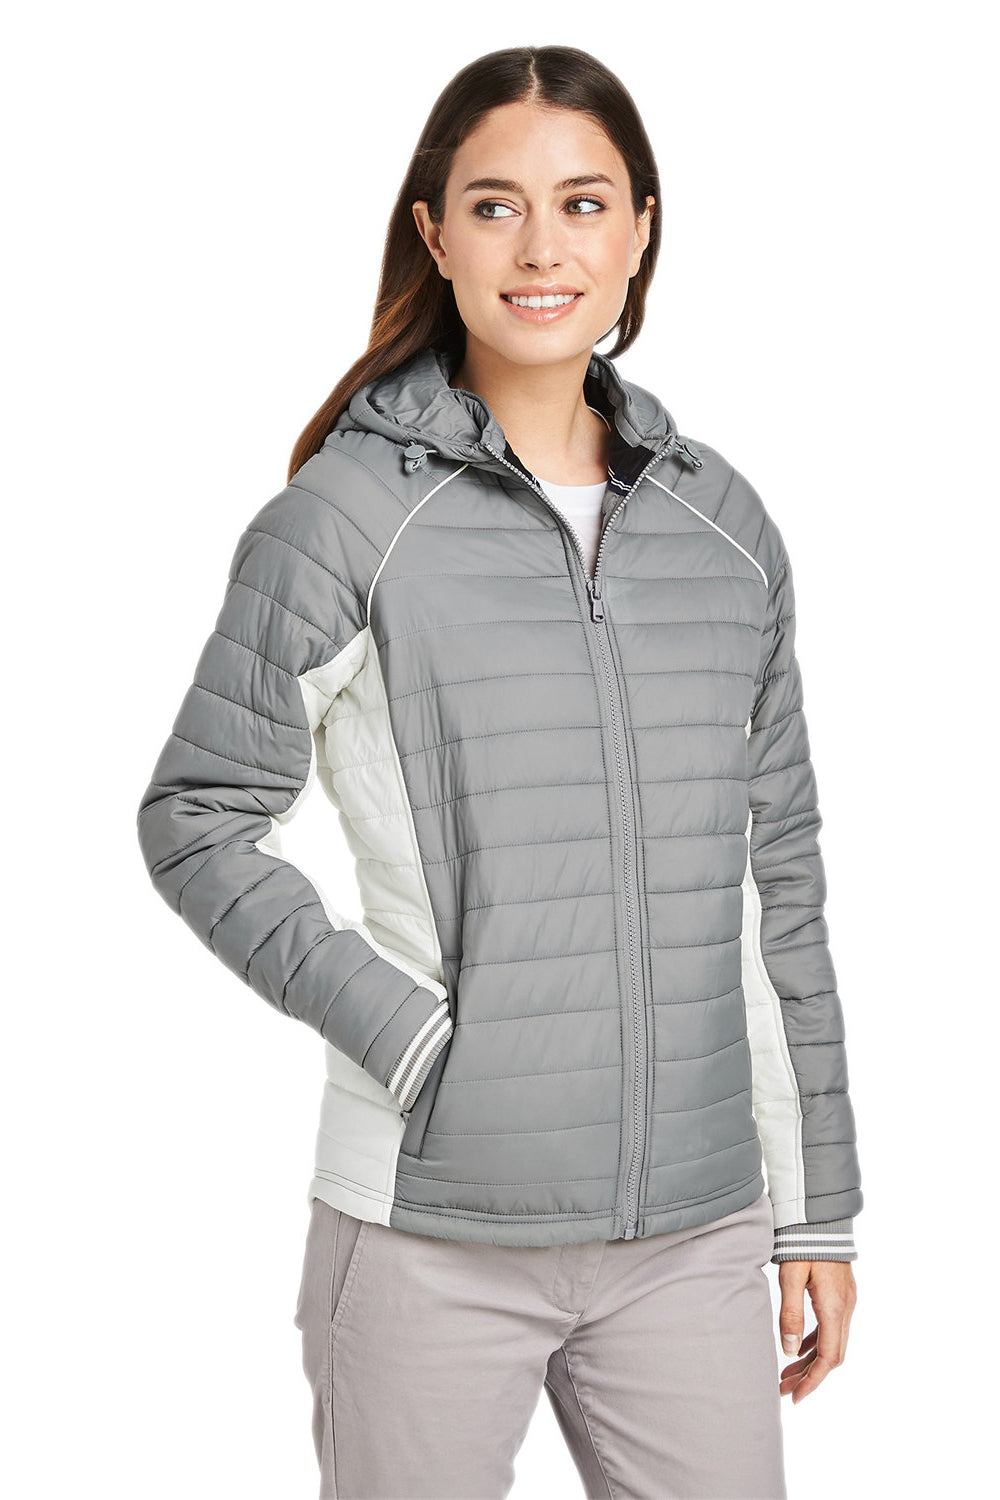 Nautica N17187 Womens Nautical Mile Packable Full Zip Hooded Puffer Jacket Graphite Grey/Antique White 3Q